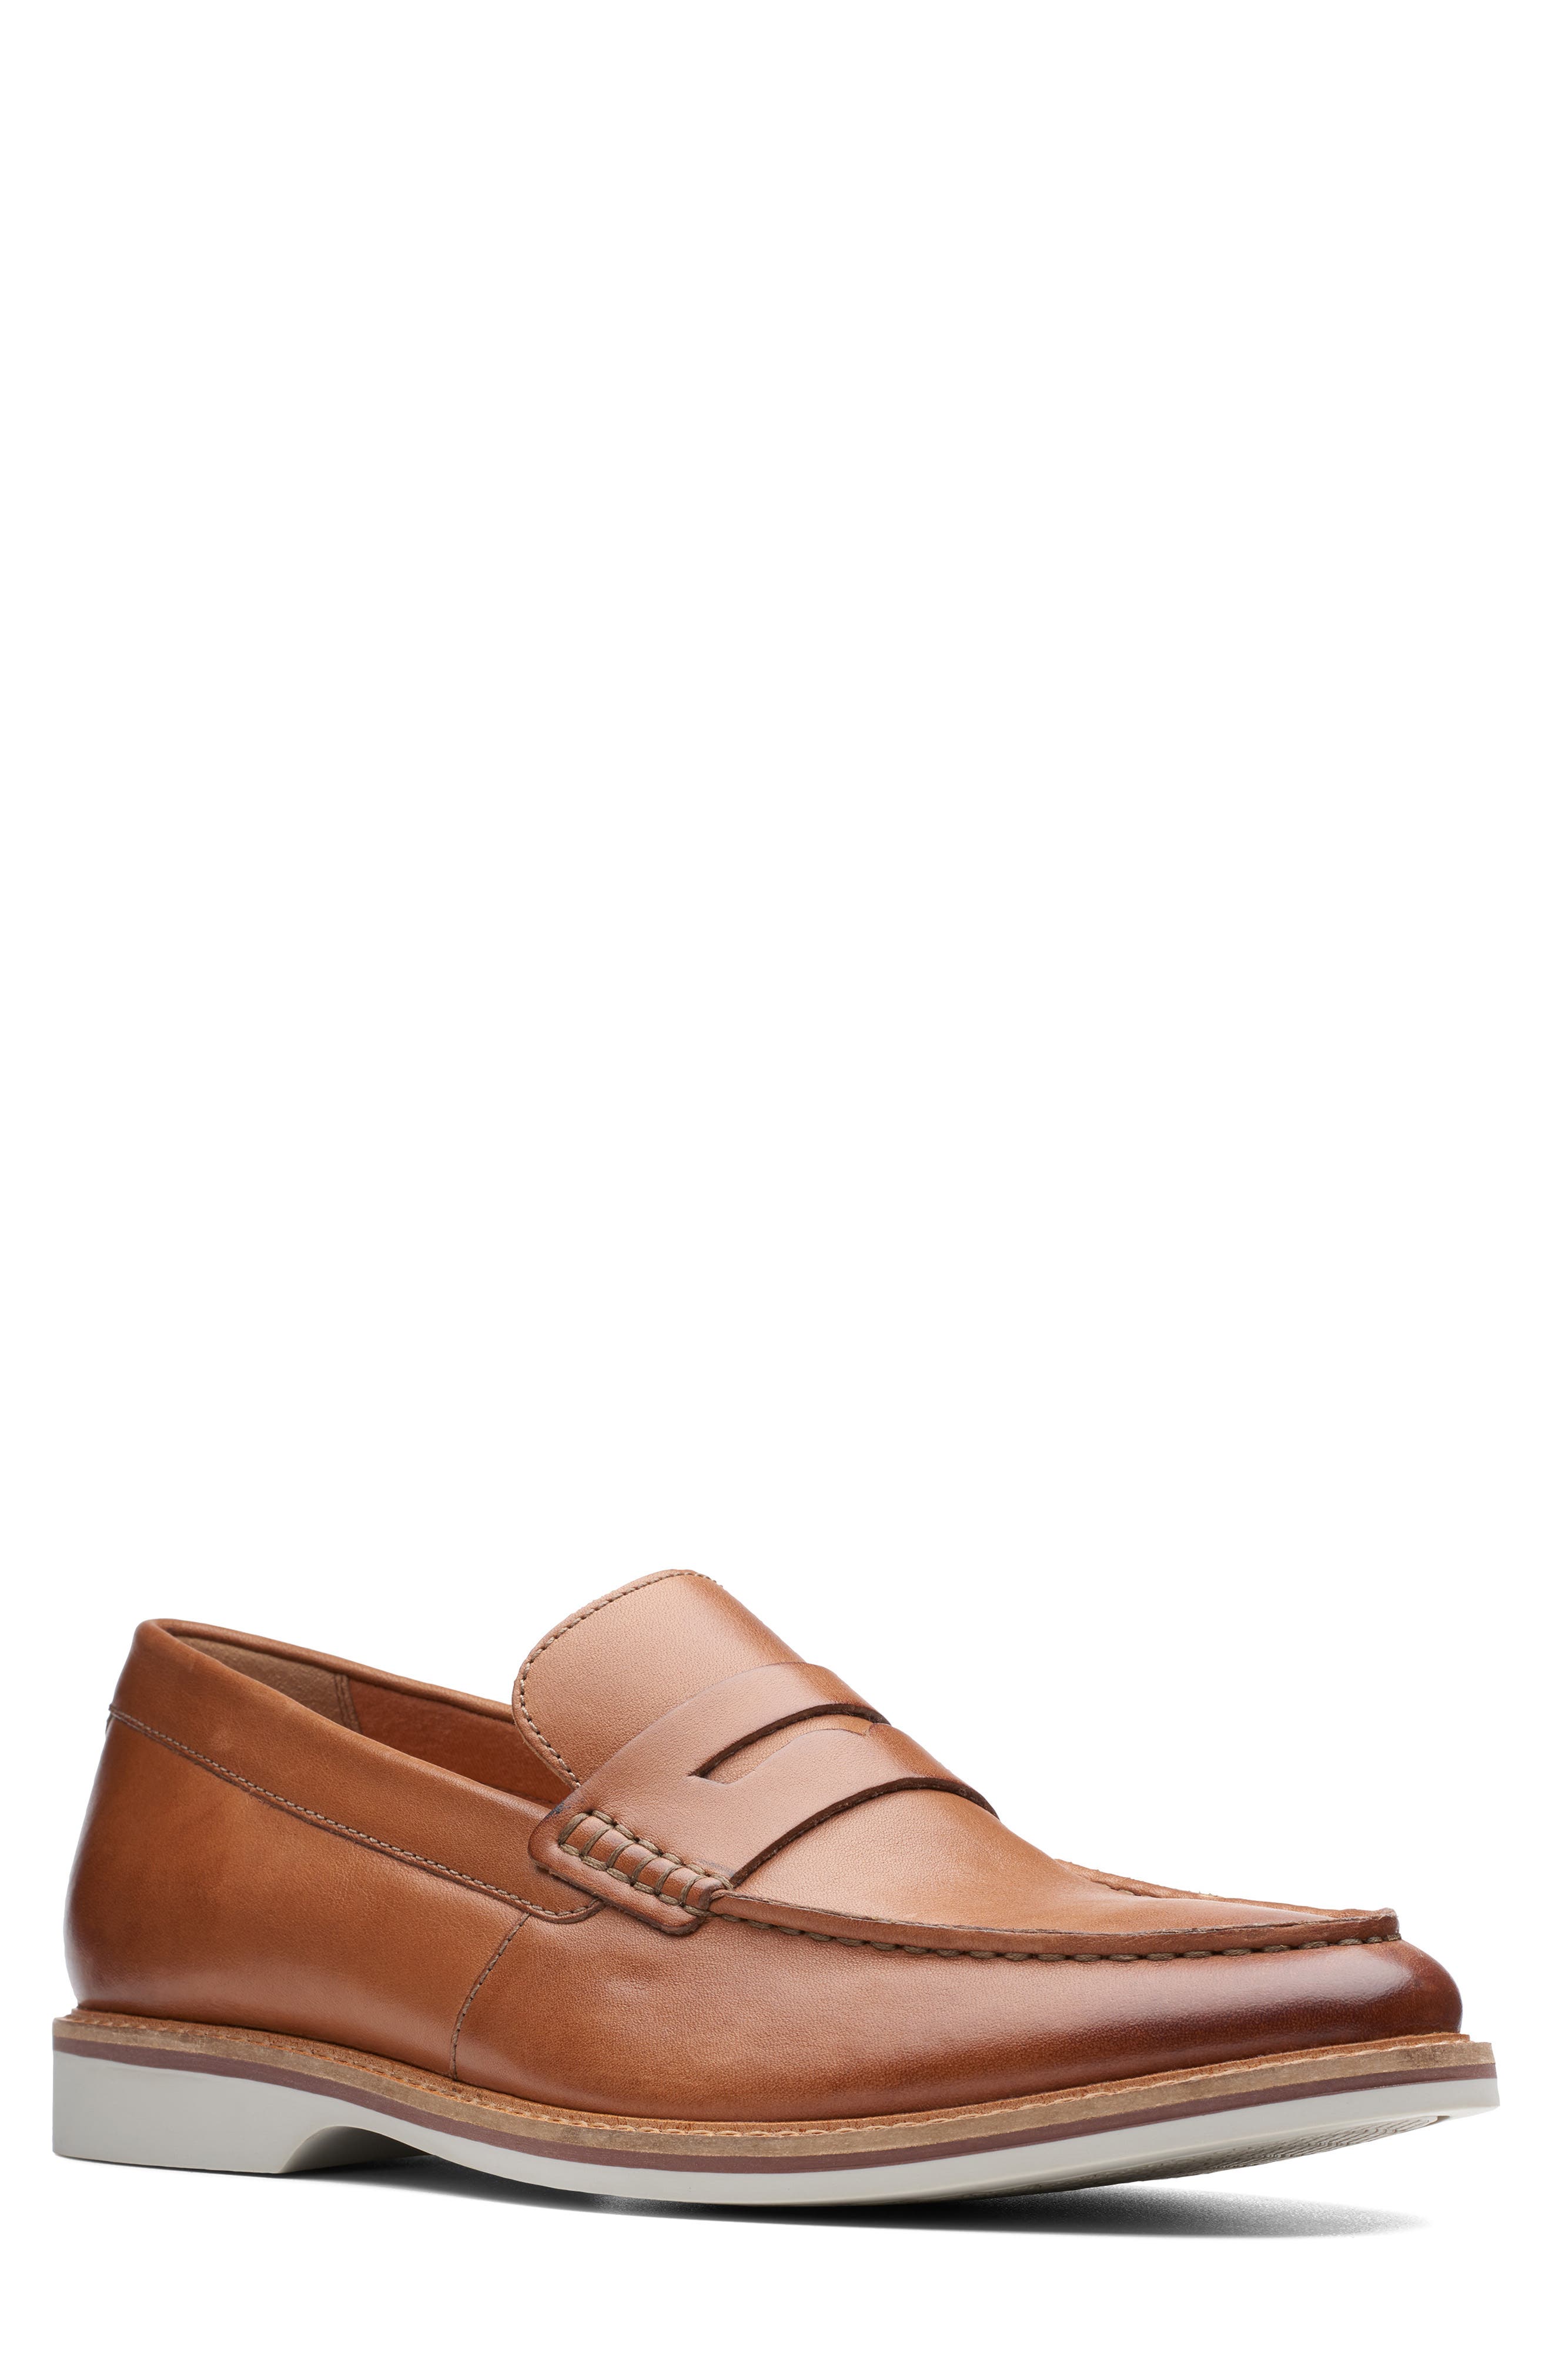 clarks penny loafers mens